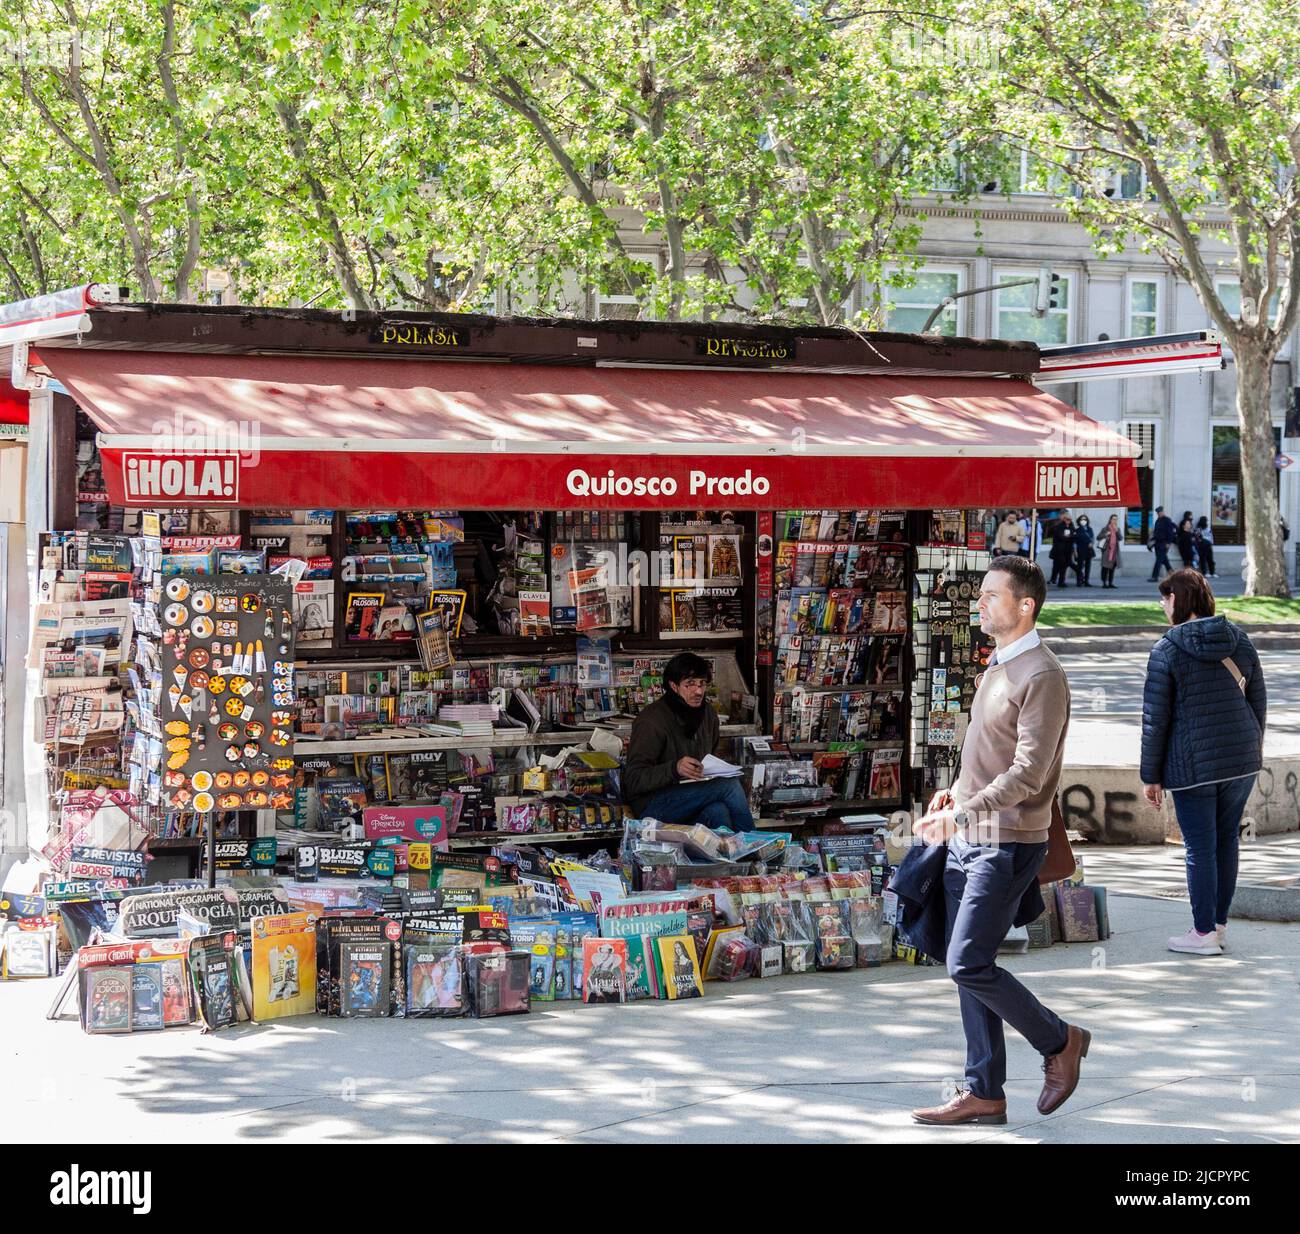 Quiosco Prado, a street kiosk near the Prado Museum in central Madrid. It sells quick turnover goods such as magazines, newspapers, maps, and books. Stock Photo